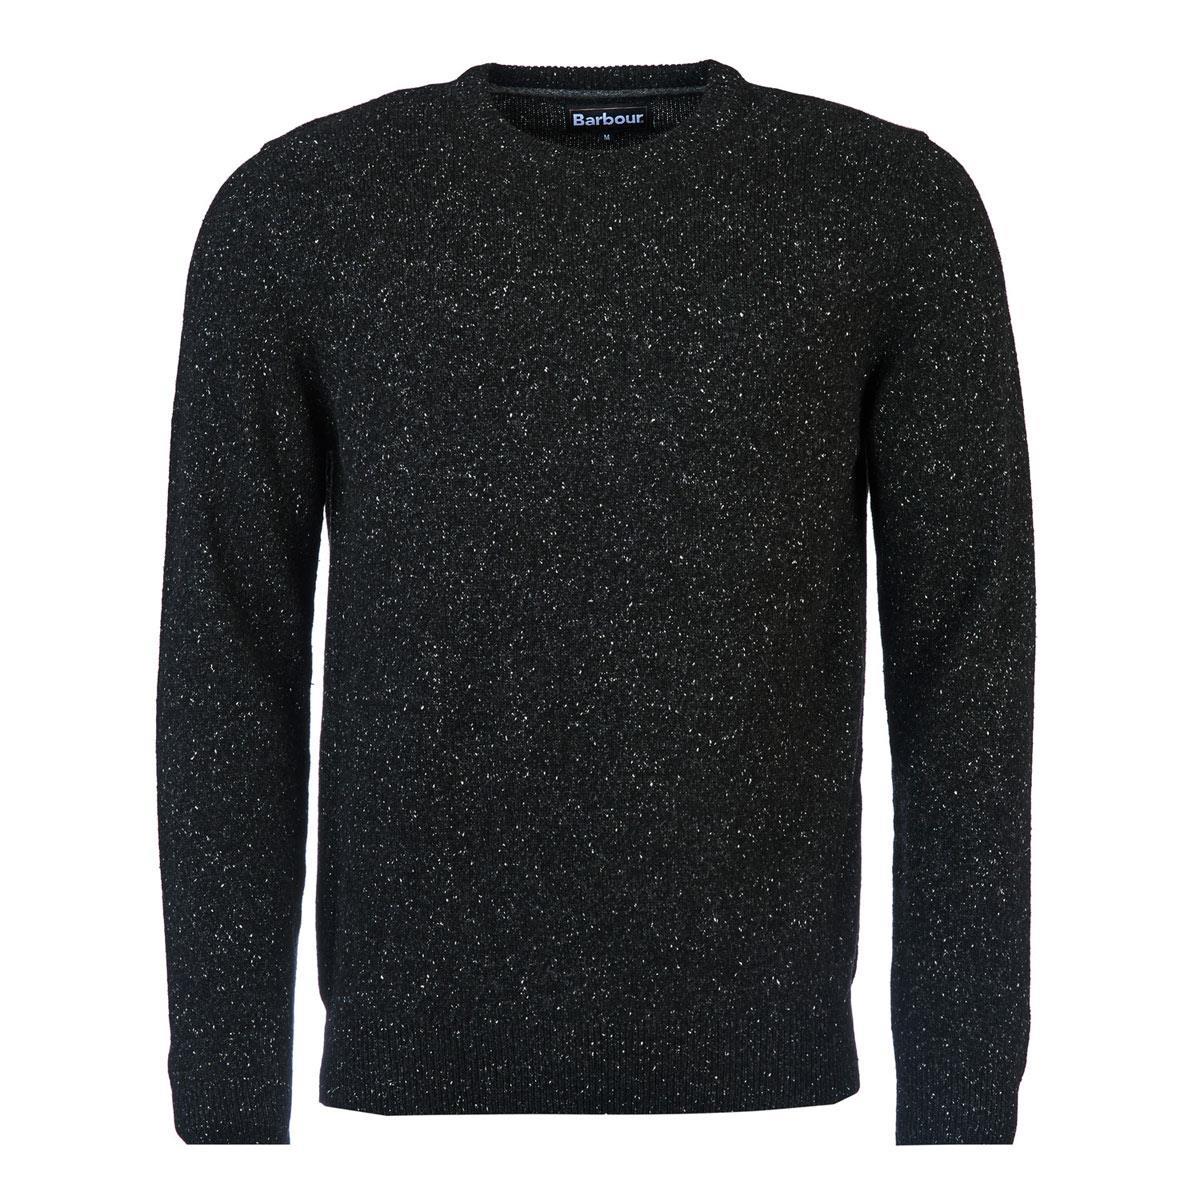 Barbour Tisbury Crew Neck Sweater Questions & Answers